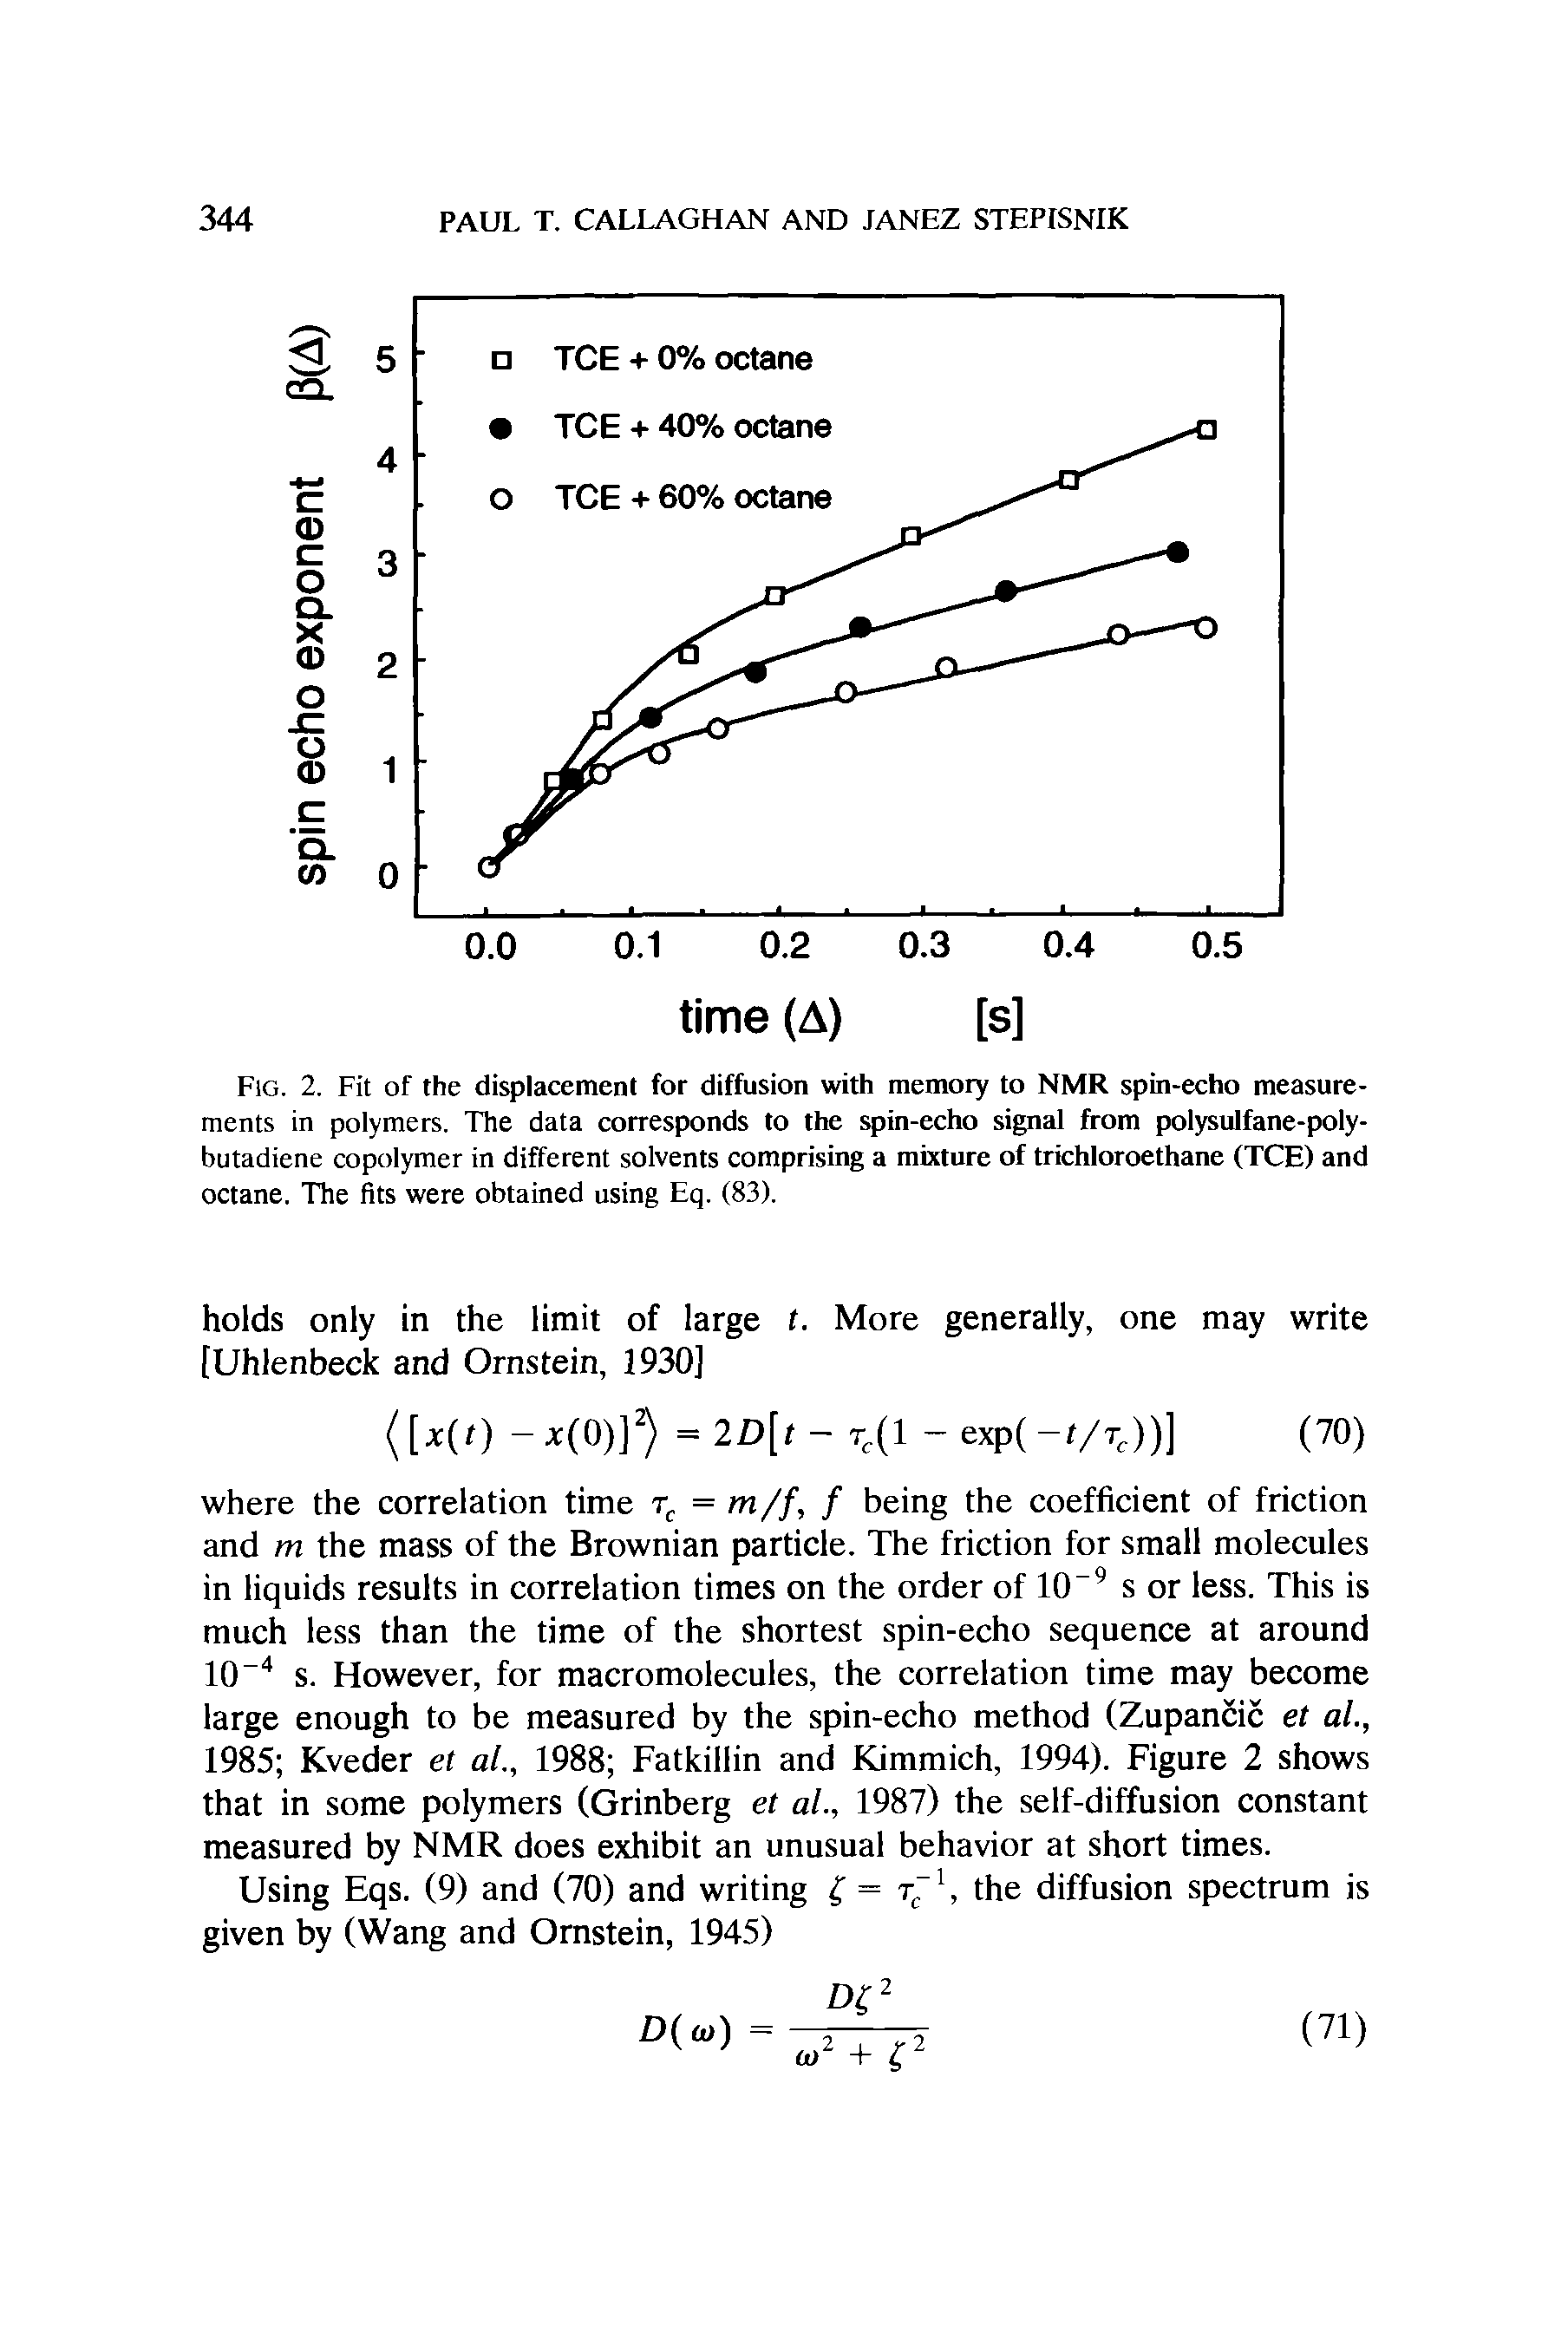 Fig. 2. Fit of the displacement for diffusion with memory to NMR spin-echo measurements in polymers. The data corresponds to the spin-echo signal from polysulfane-poly-butadiene copolymer in different solvents comprising a mixture of trichloroethane (TCE) and octane. The fits were obtained using Eq. (83).